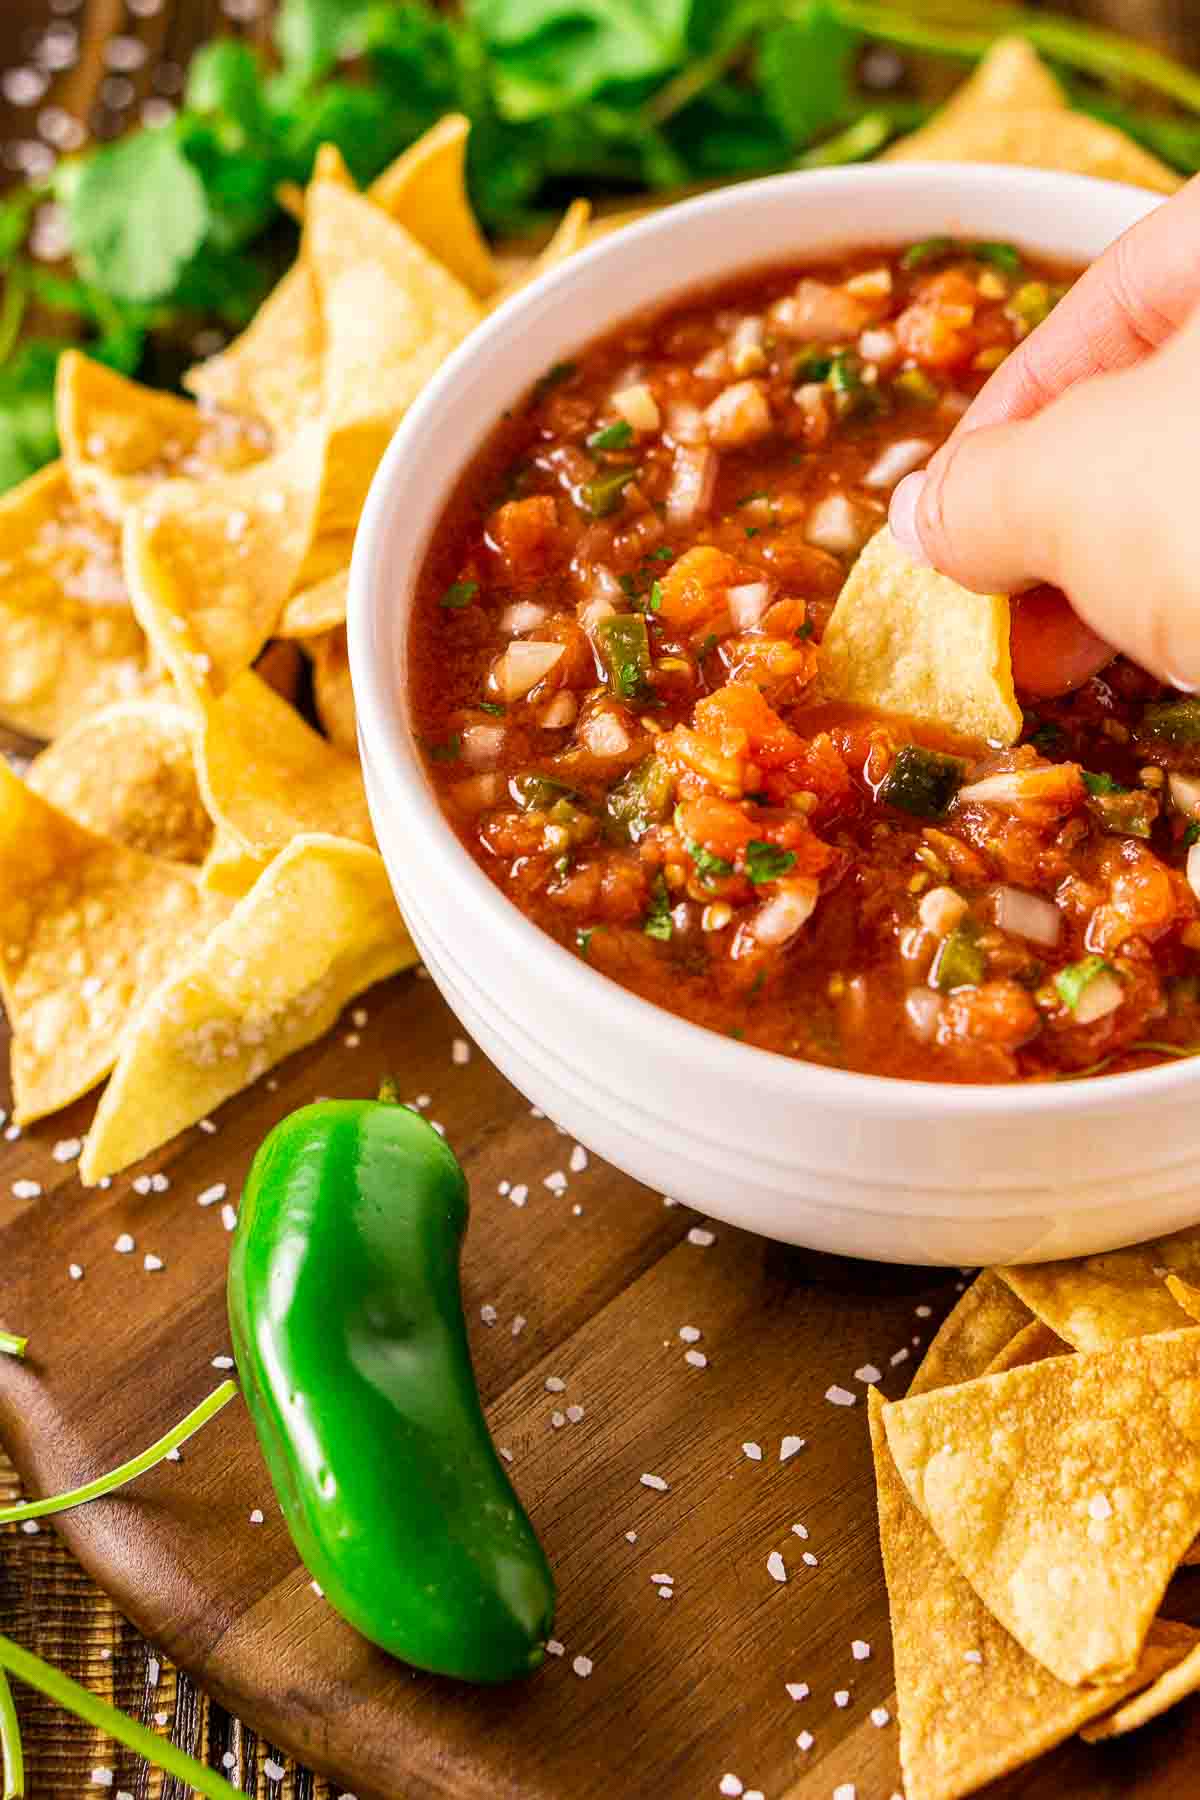 A hand dipping a tortilla chip into a white bowl of the smoked salsa with a jalapeño to the bottom left.